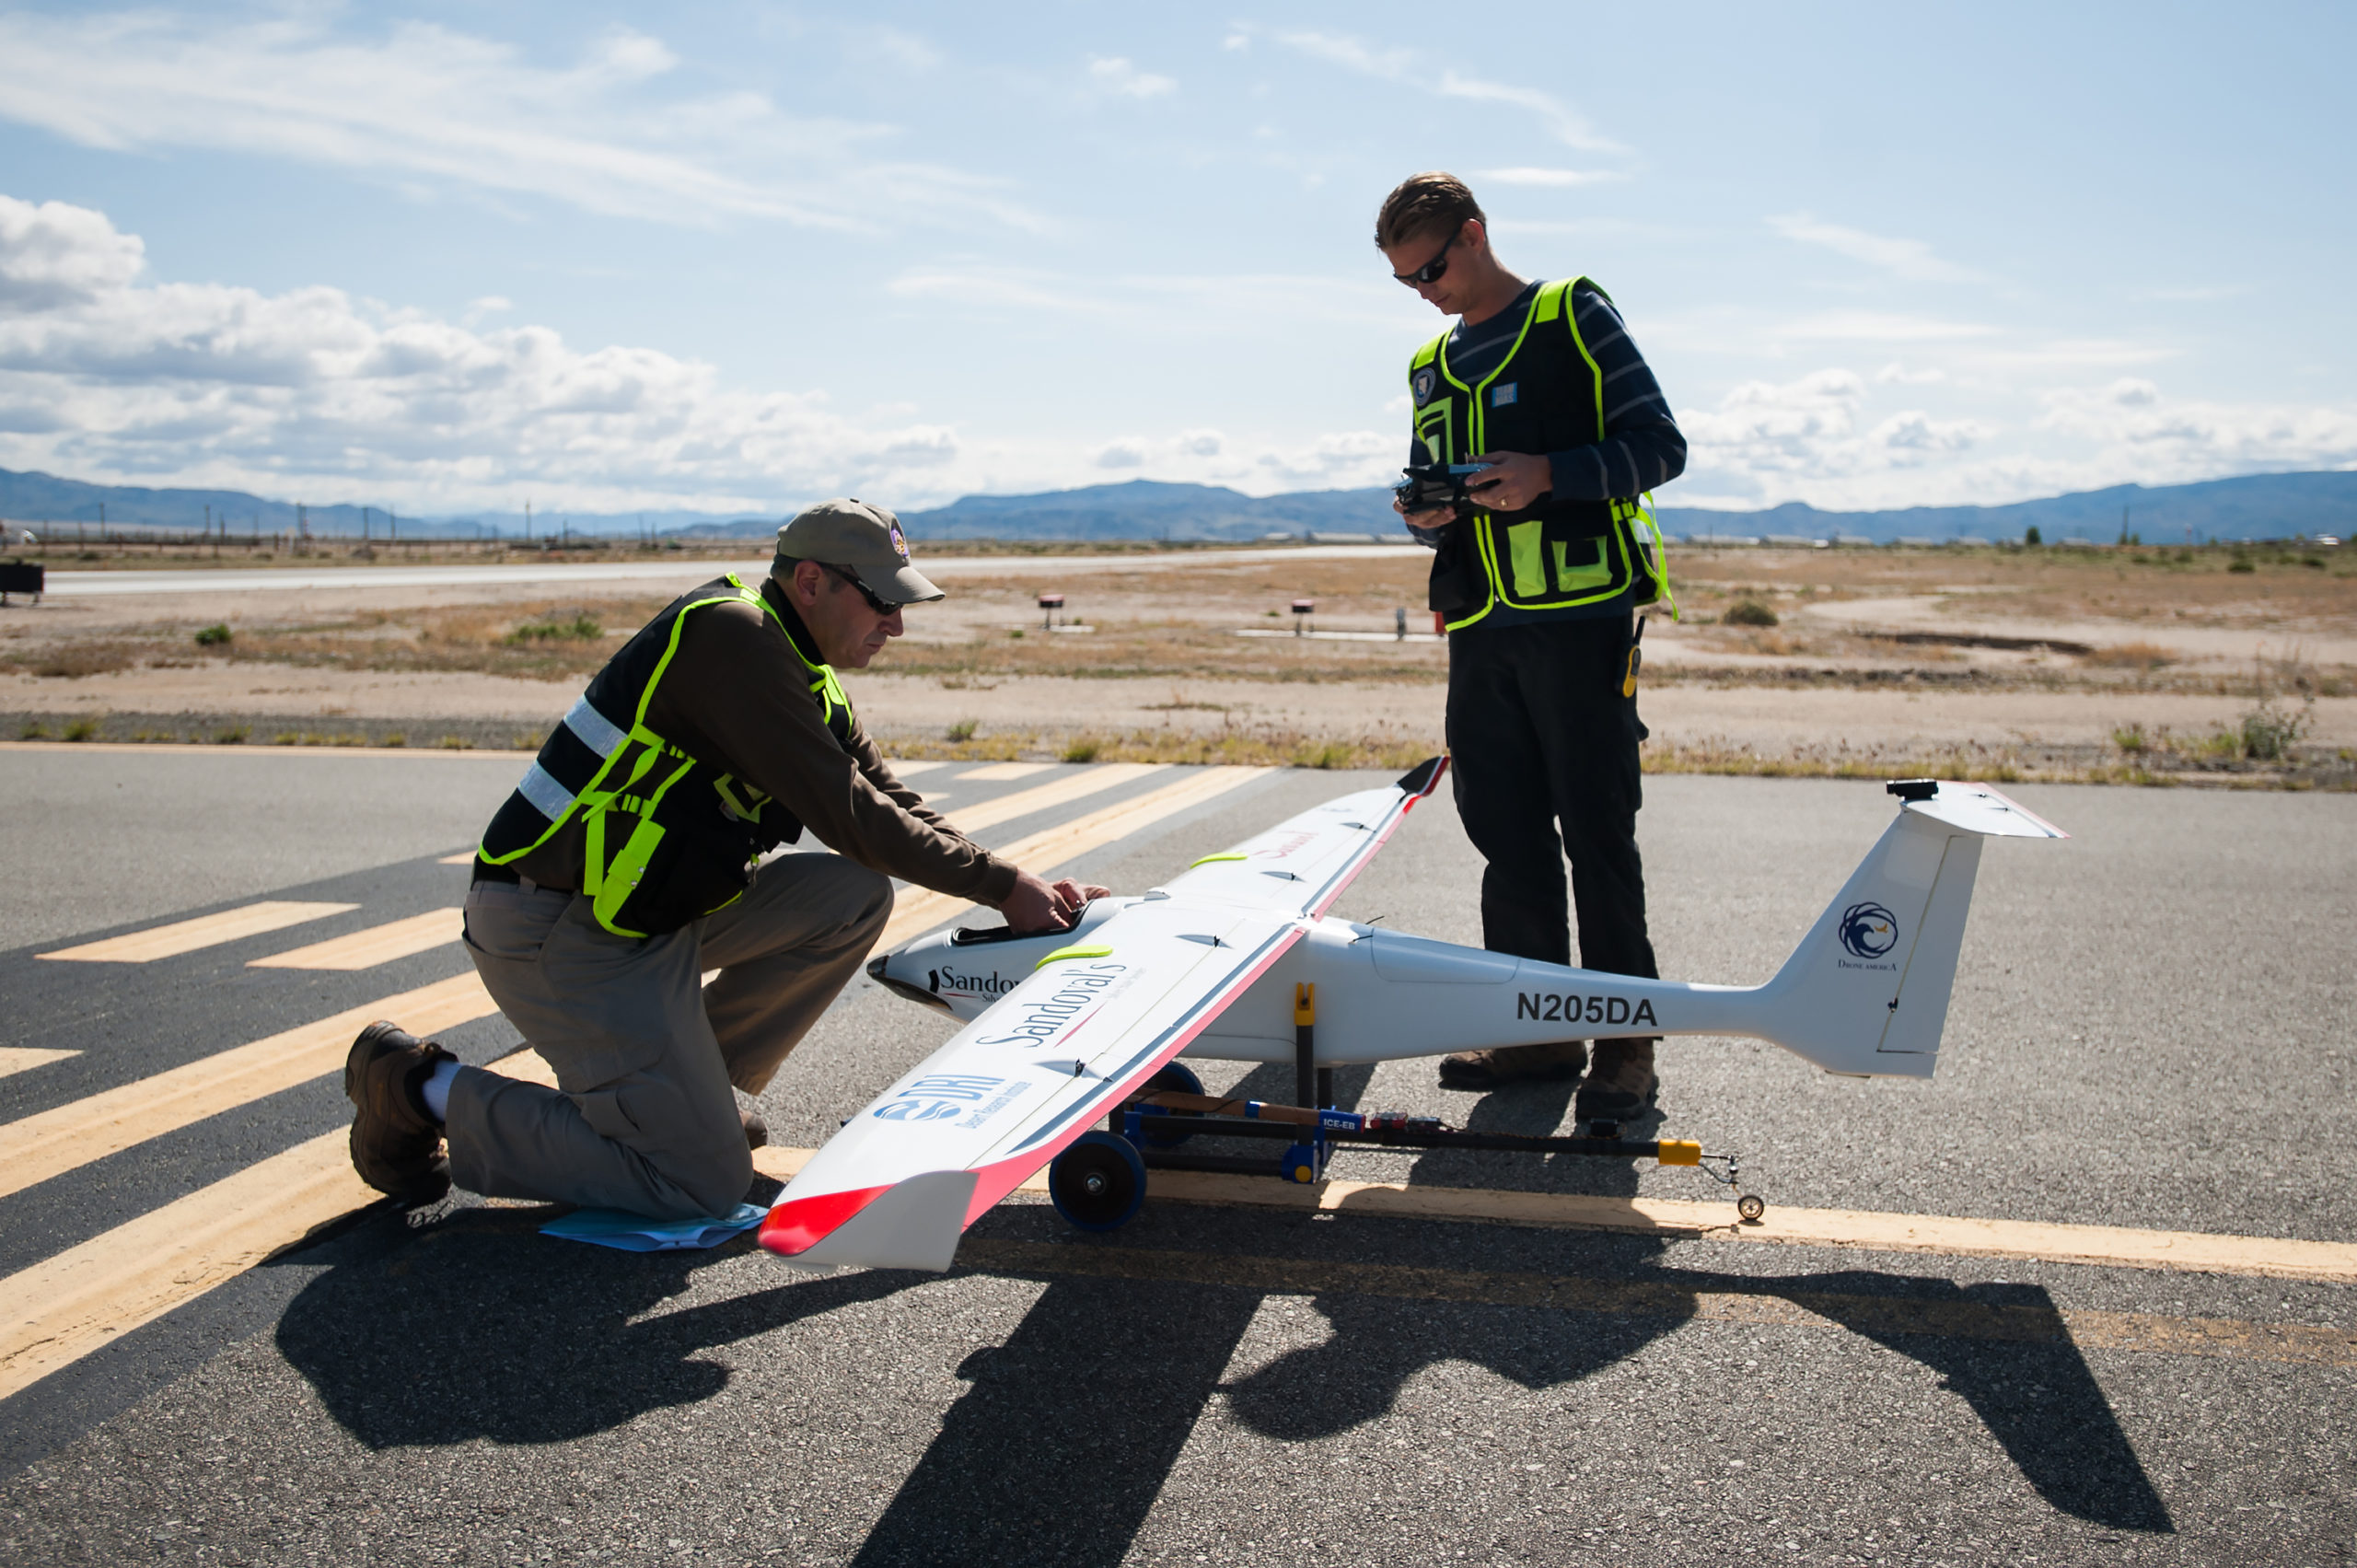 (From Left) Drone America's Todd Richman, pilot, and Kyle Pruett, engineer and pilot, prepare to test fly the Savant sUAS with cloud seeding flares at the Hawthorne Industrial Airport in Hawthorne, Nev. on Friday, April 29, 2016. The Savant flew to 400 feet and was successful in igniting two silver-iodide cloud seeding flares. Photo by Kevin Clifford/Drone America